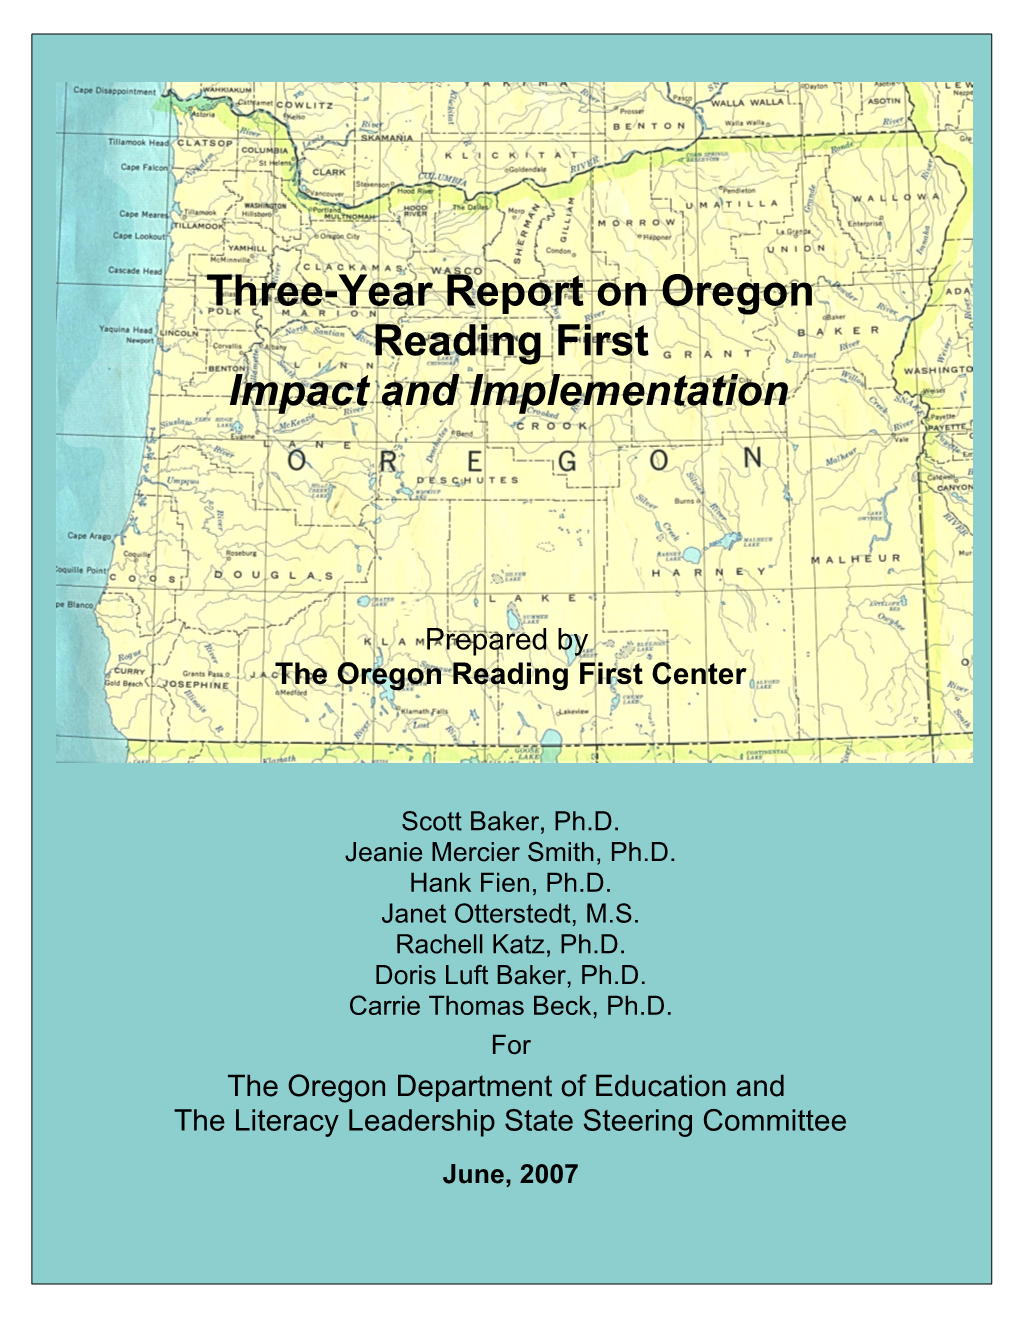 Three-Year Report on Oregon Reading First